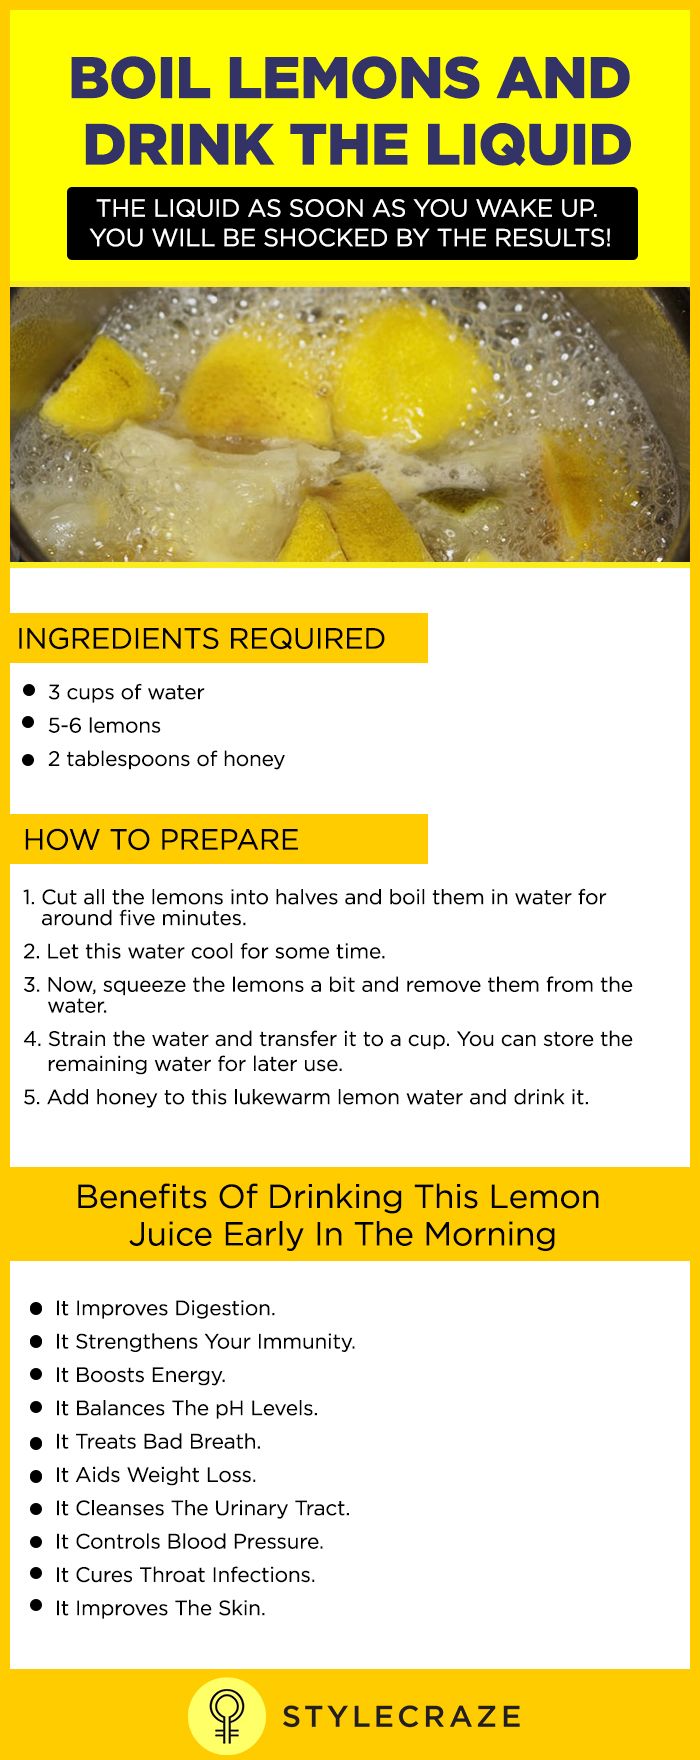 Boil Lemons In Water For A Healthy Morning Drink Infographic